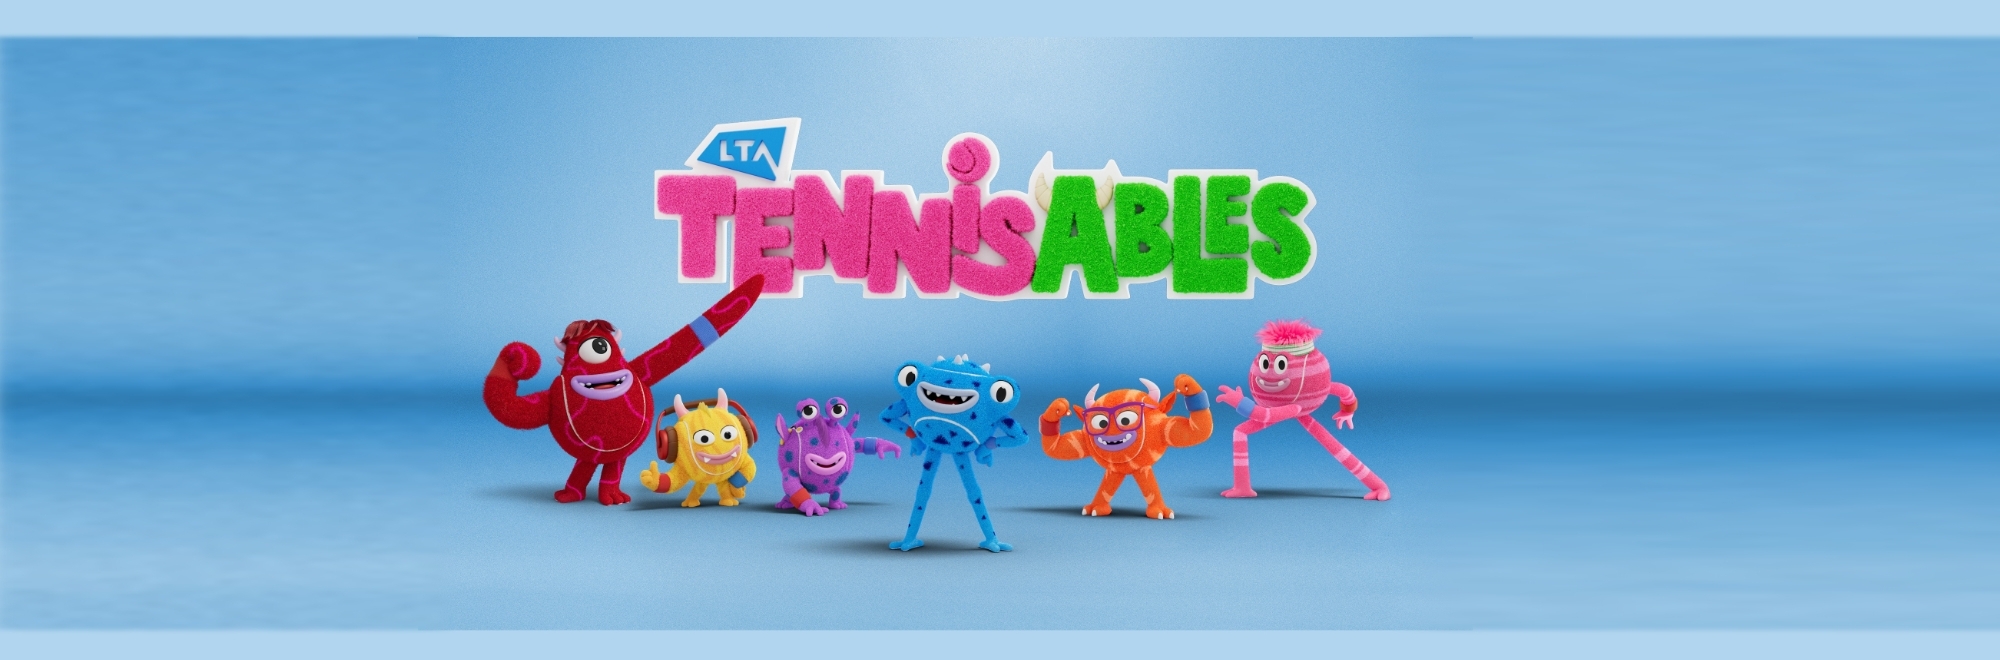 The Tennisables: Characters to help get the next generation of kids playing tennis